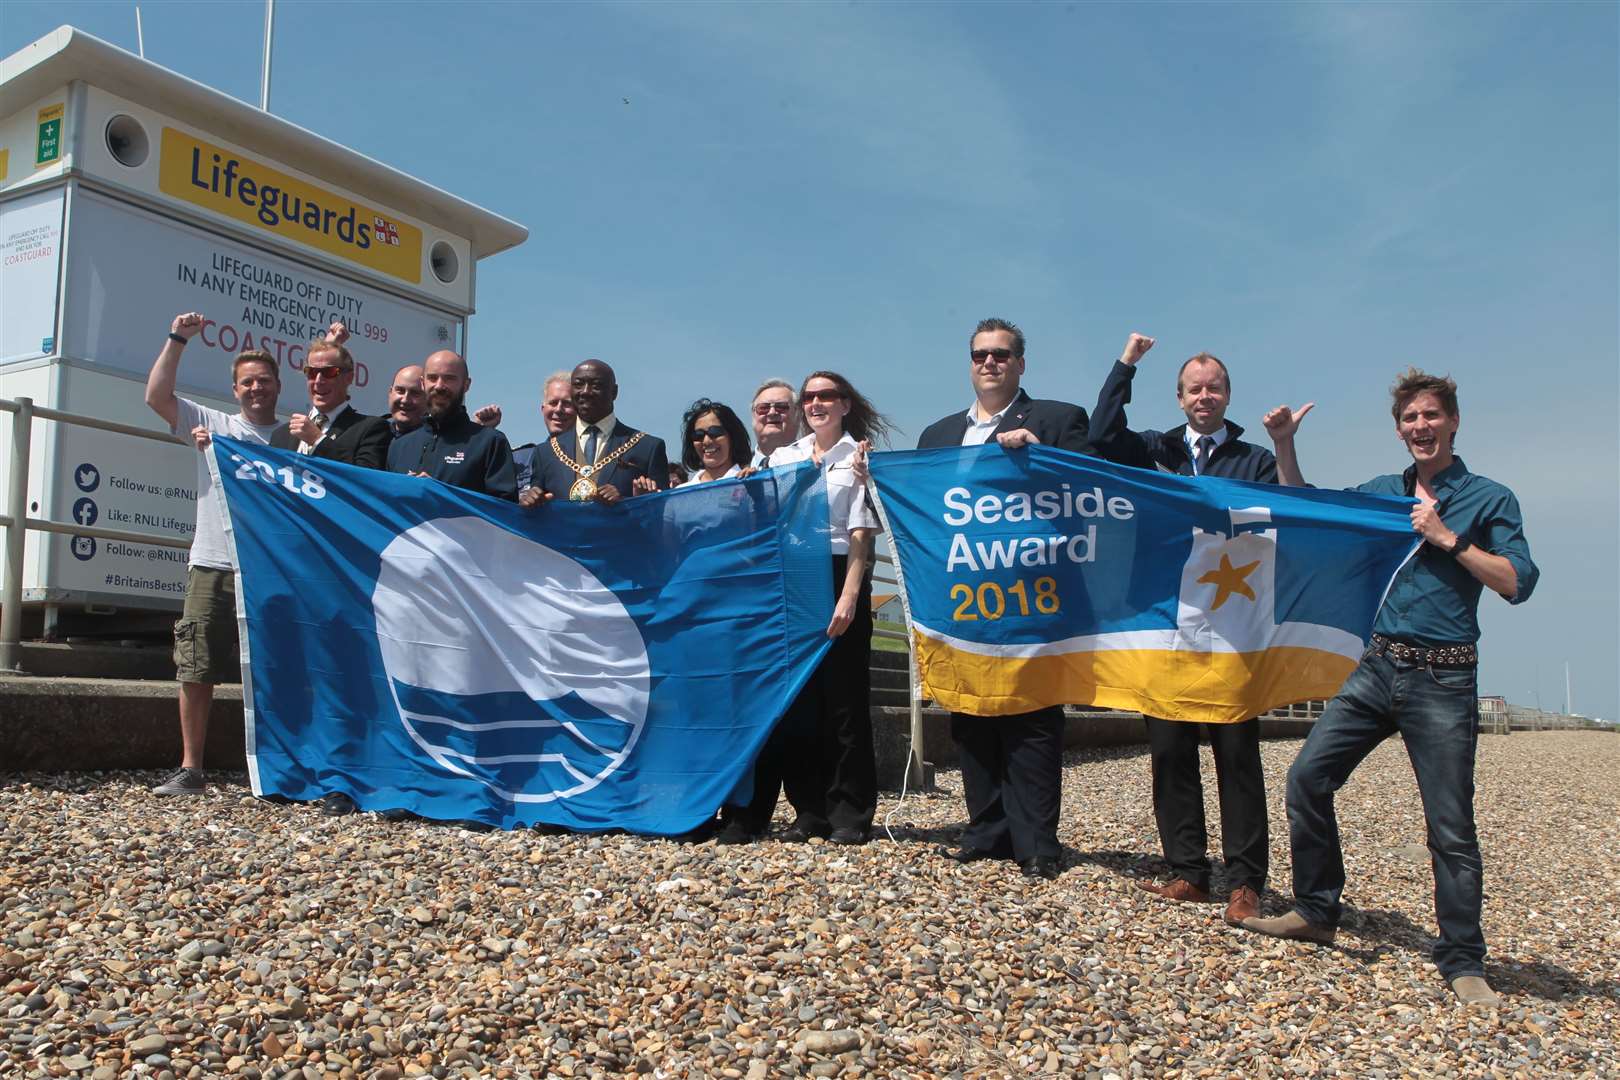 The raising of Blue Flags at Minster Leas in 2018